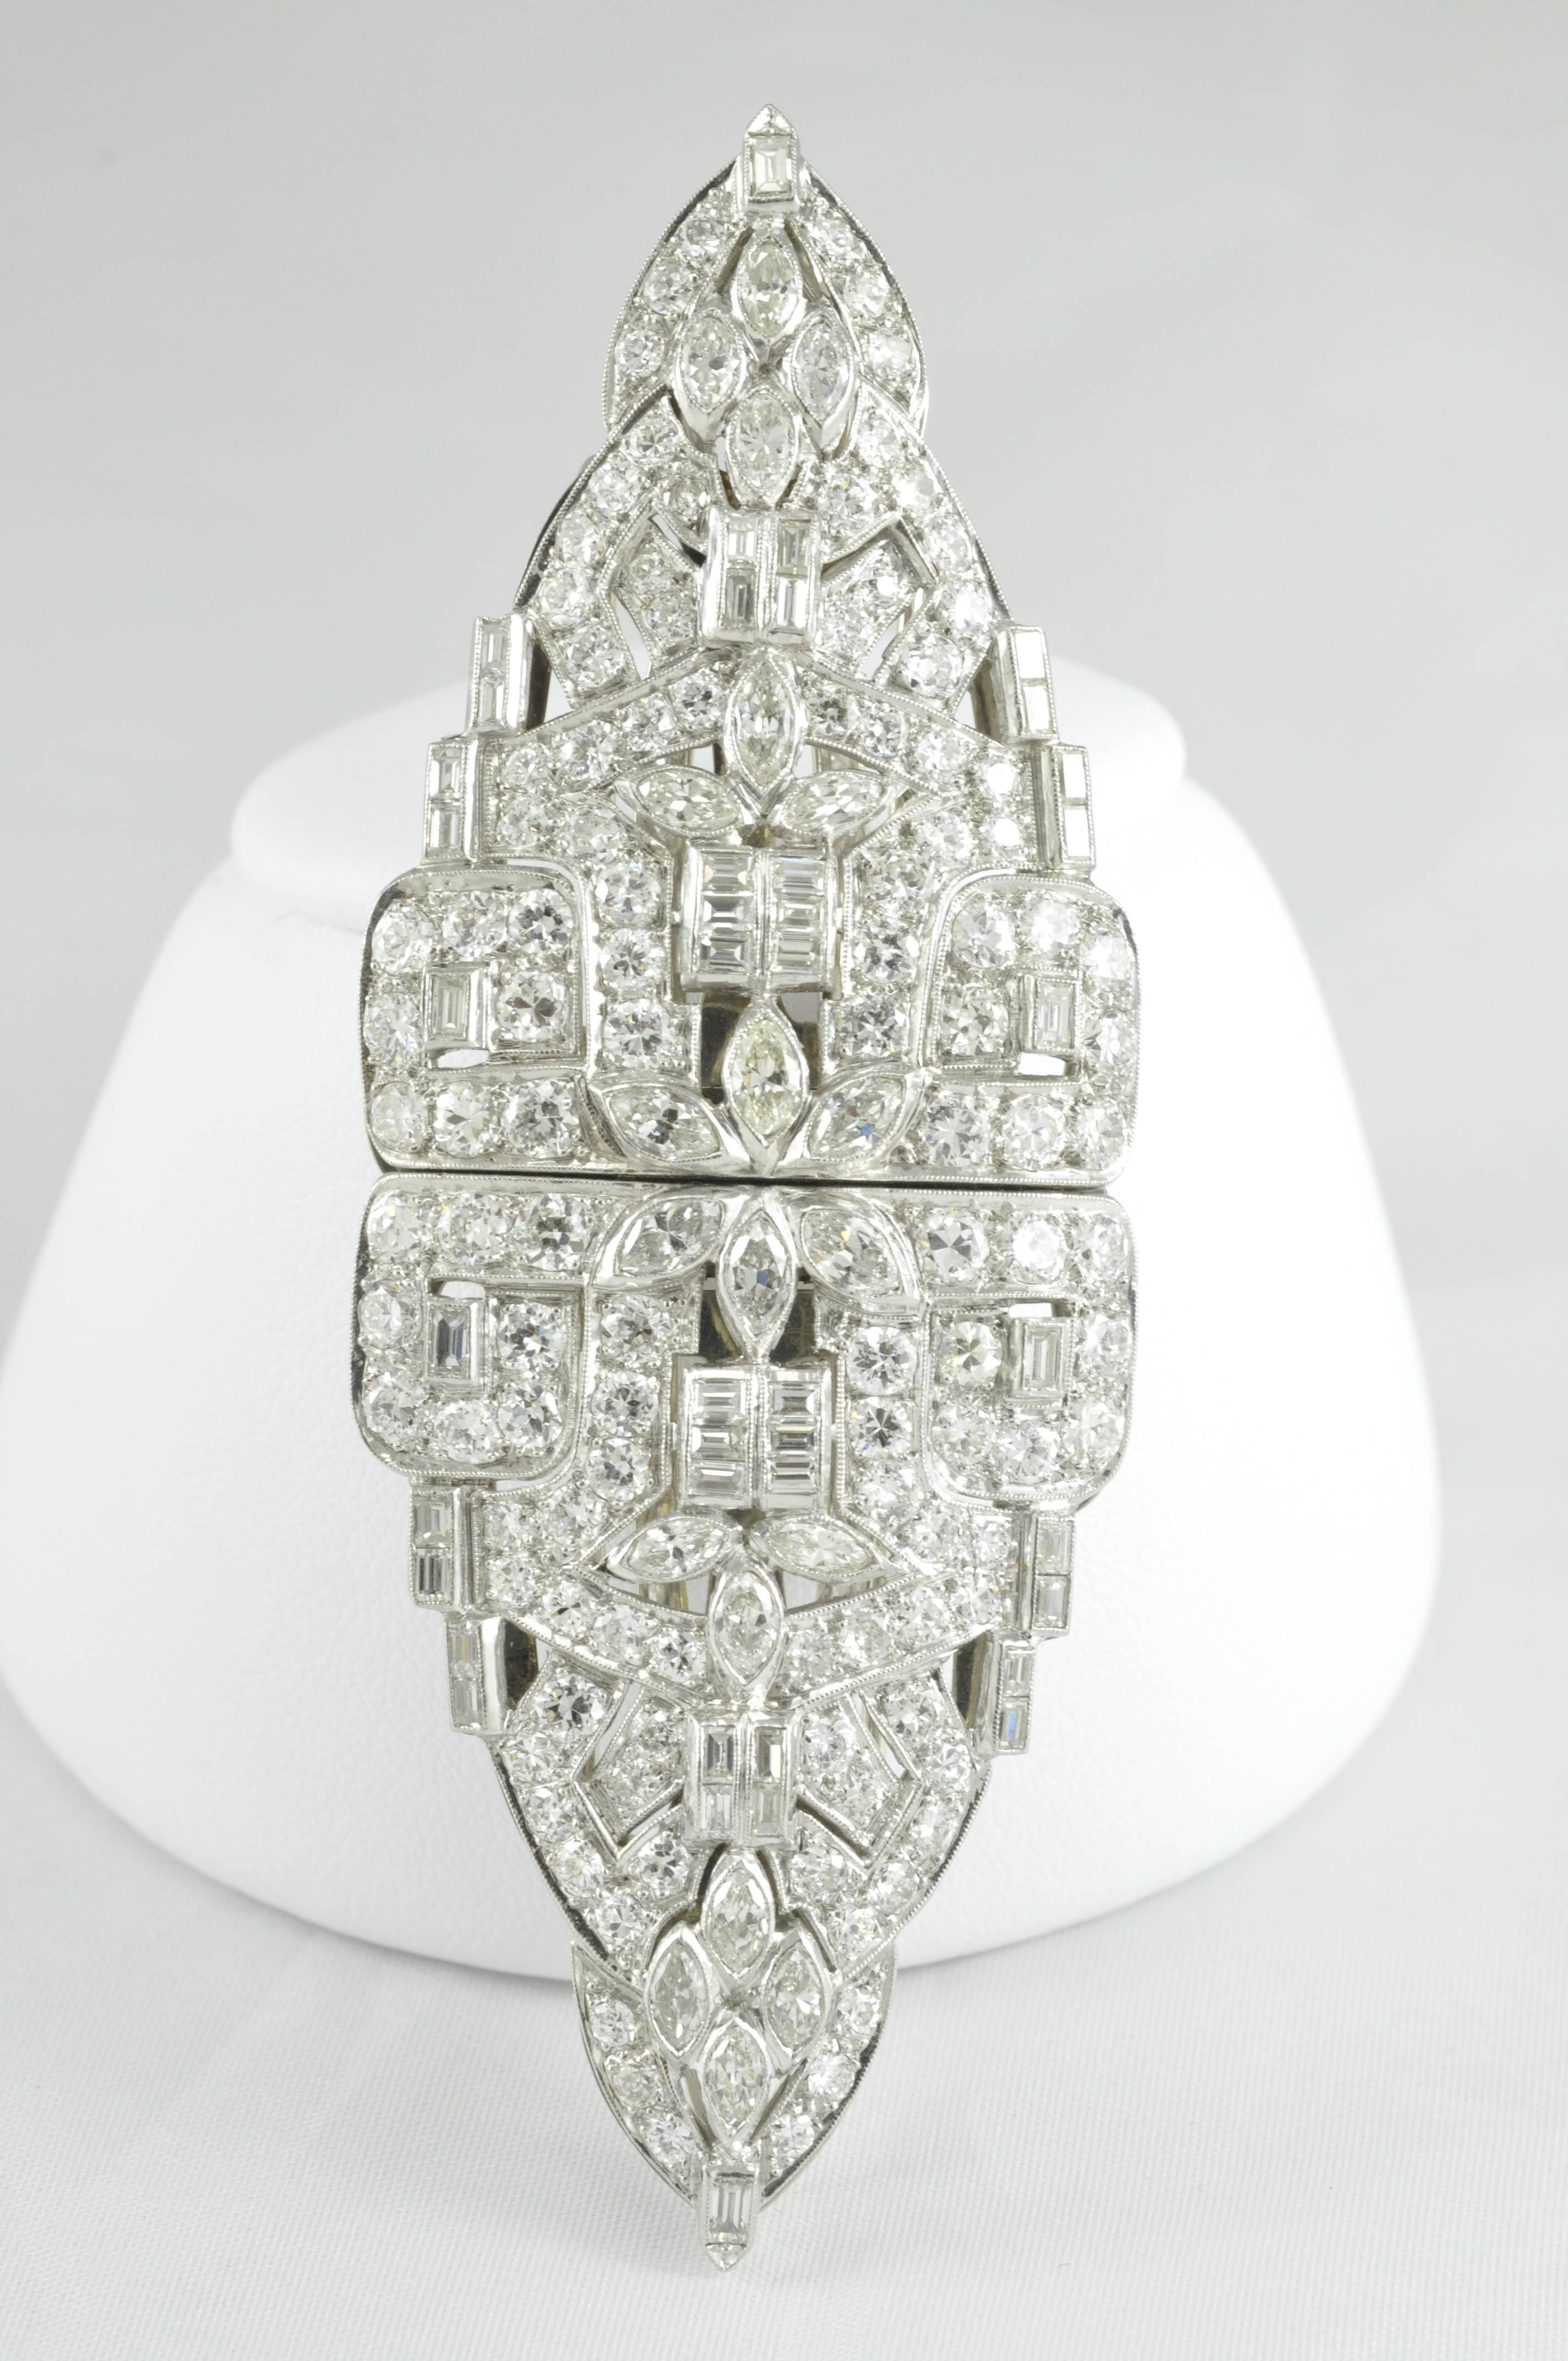 Platinum Dress Pin (approx. 10ctw) Round, Baguette, and Marquise Diamonds. Also works as collar stay. Excellent condition. 